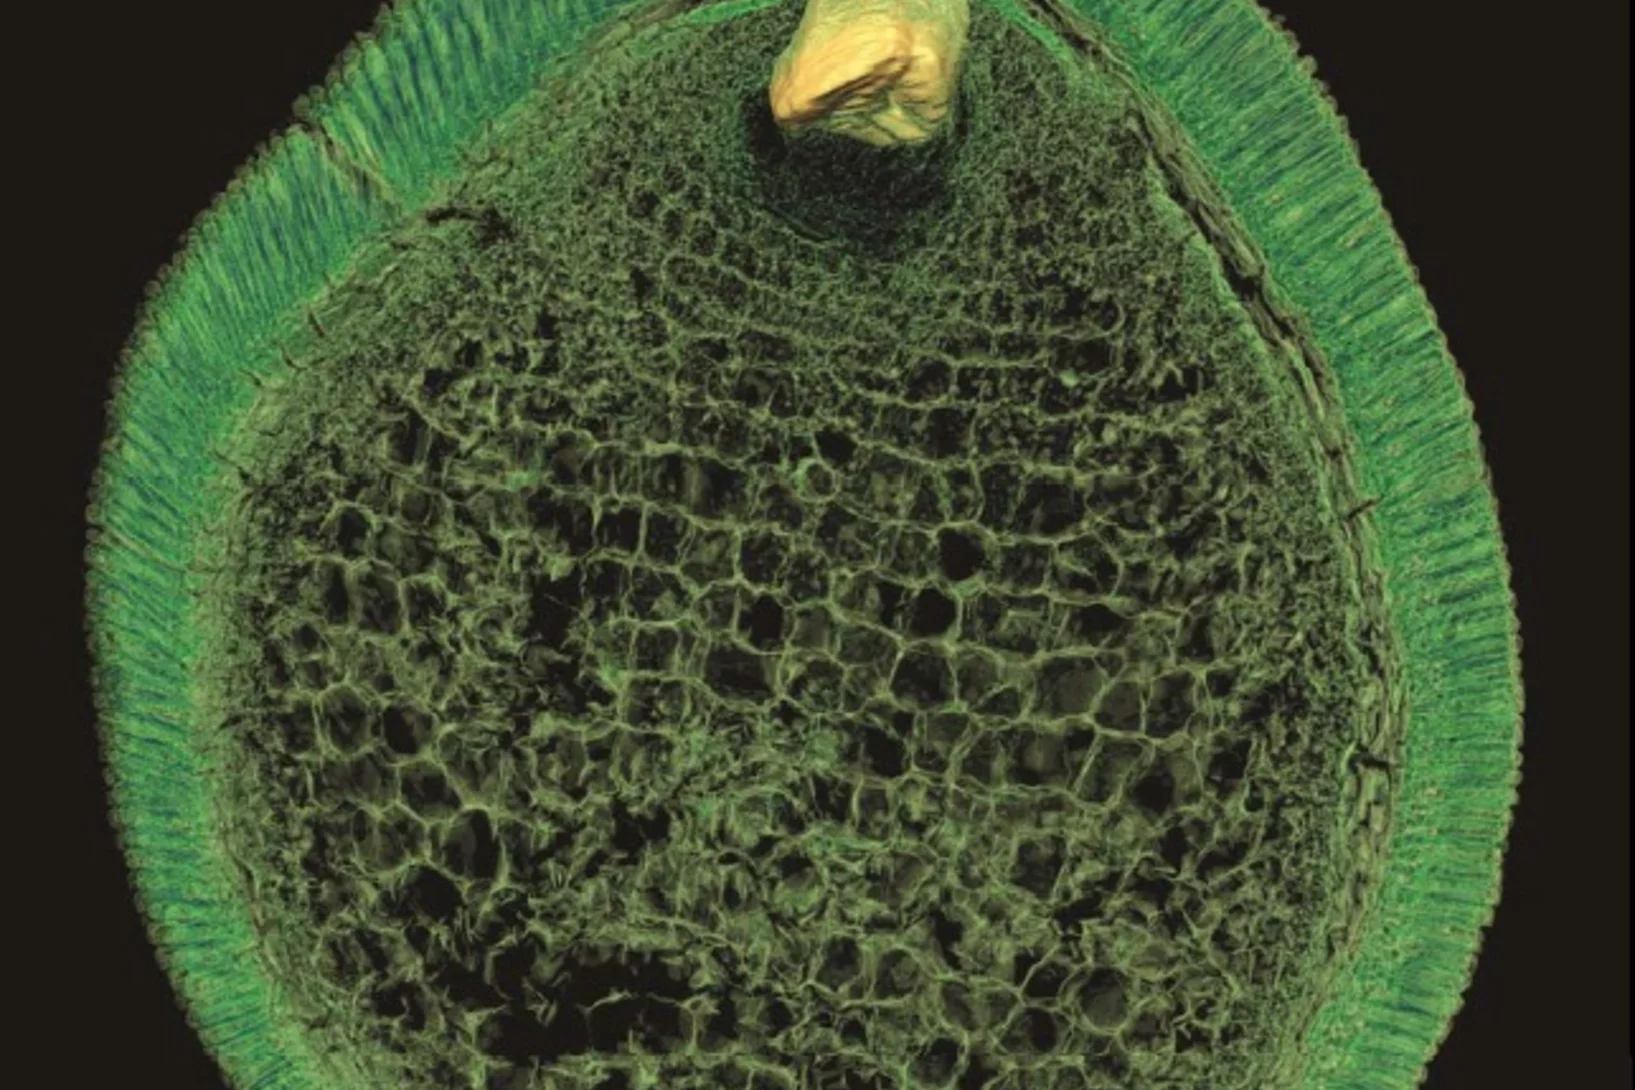 Virtual section through the middle of a seed from the Early Cretaceous exposing embryo and nutrient storage tissue. The tiny embryo shown in 3D has two rudimentary cotyledon primordia documenting the dicotyledonous nature of this extinct angiosperm. The fossil is reconstructed from synchrotron radiation X-ray tomographic microscopy measurements performed at the Tomcat beamline at the Swiss Light Source. Image: Else Marie Friis